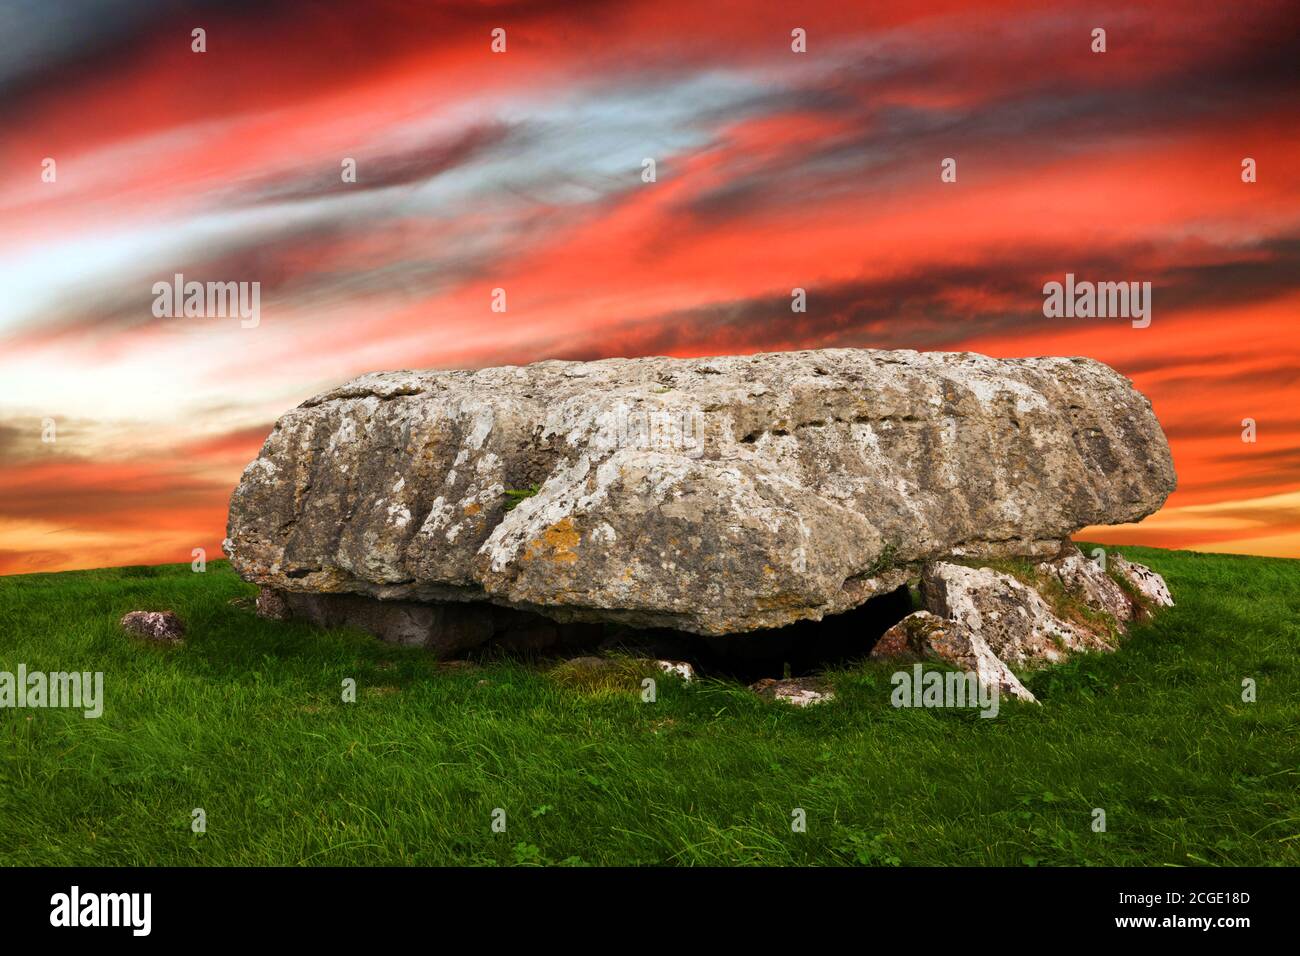 Lligwy Cromlech is a Neolithic burial chamber in Anglesey, Wales. Excavation found remains of up to 30 people. The sky and skyline has been changed. Stock Photo